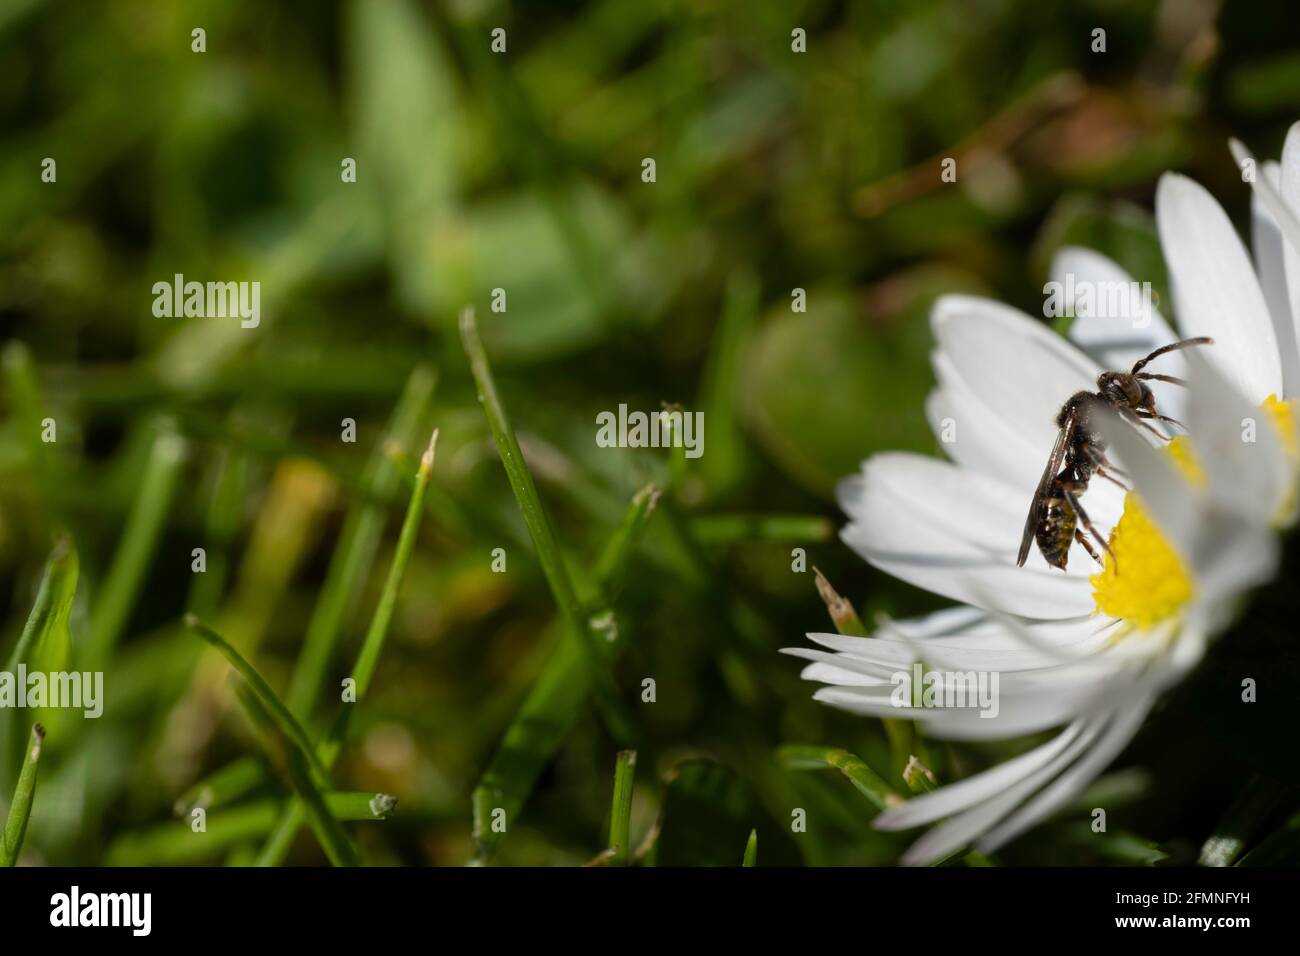 Insect walks on the yellow ovules in the center of a daisy flower in the just-cut grass. Focus on the insect Stock Photo